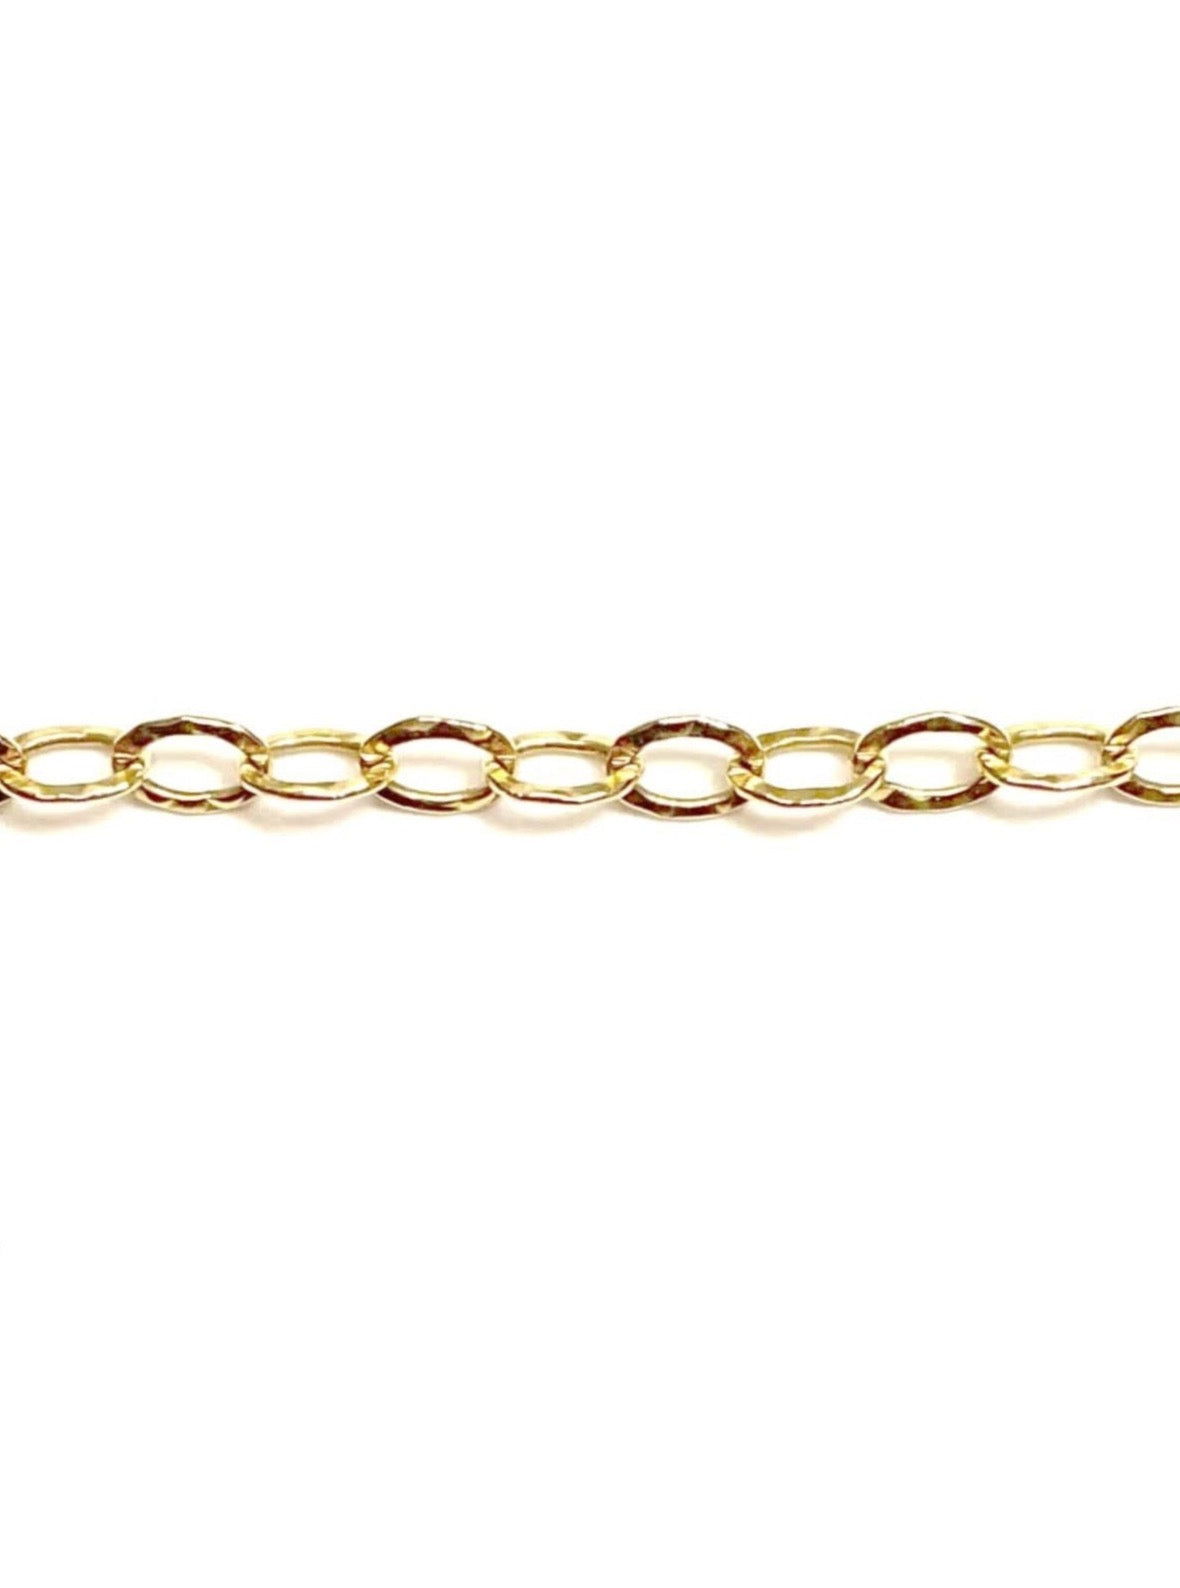 Lola Chain in Gold Filled